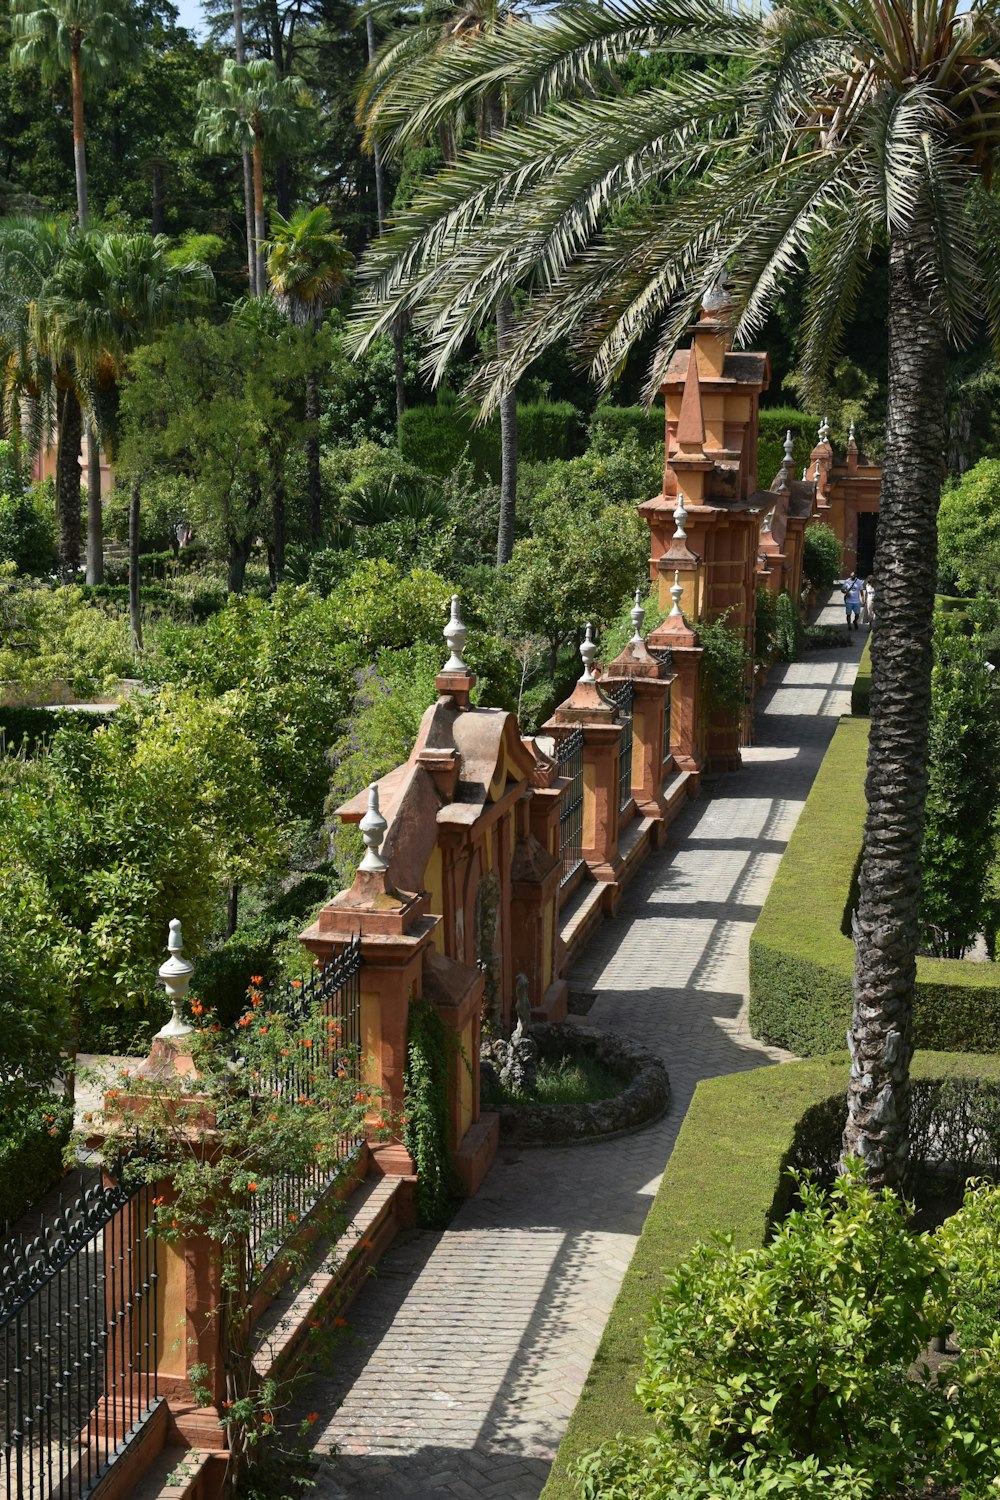 a view of a walkway in a park with palm trees